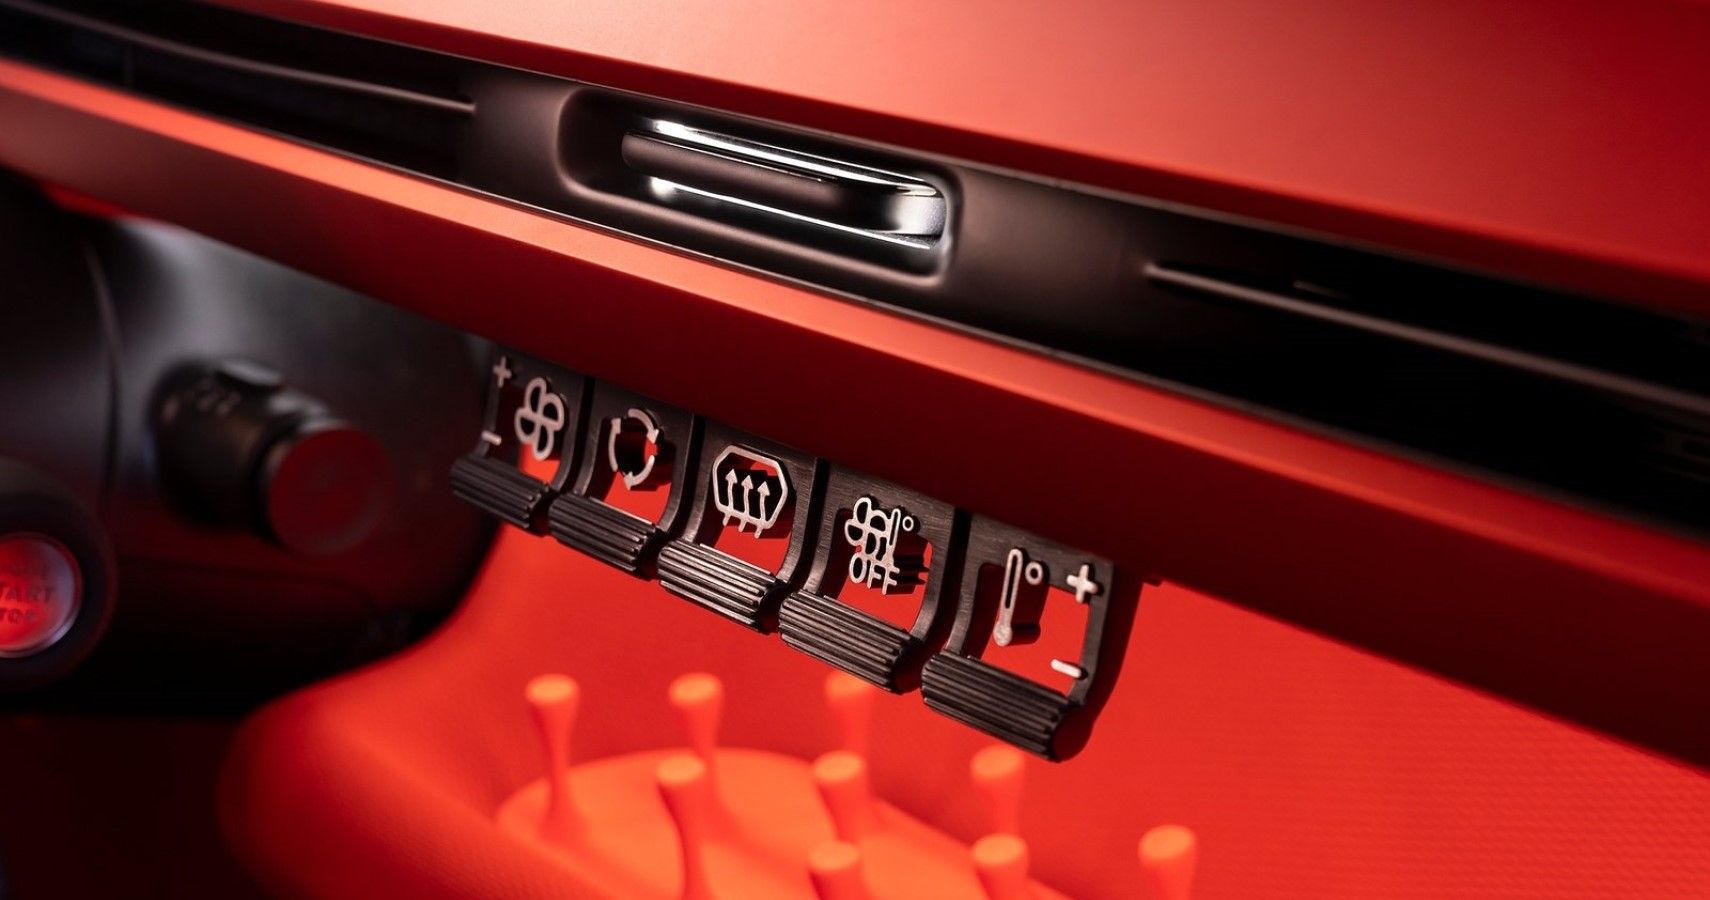 Citroën Oli Concept dashboard switches close-up view